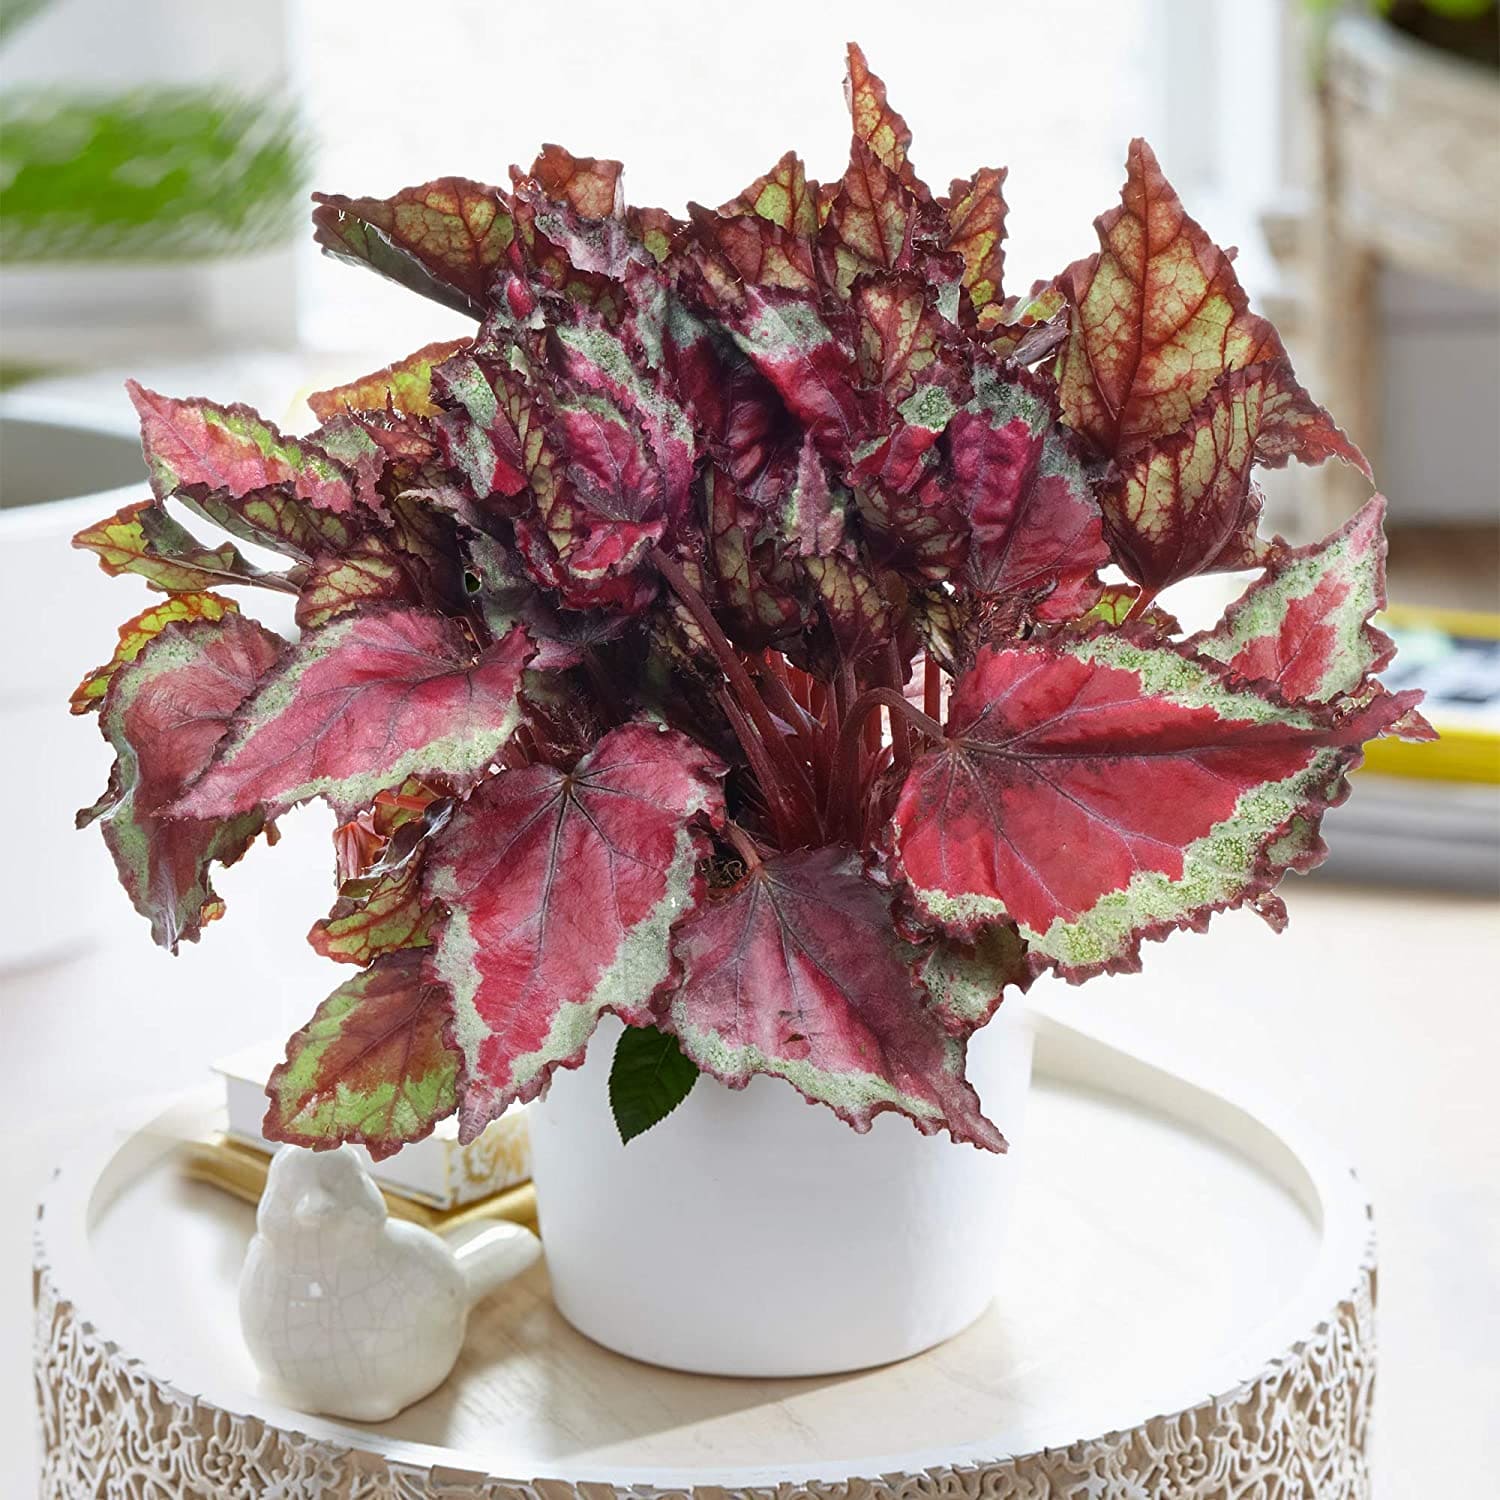 Appealing red heart-shaped houseplants to decorate your home more charming - 75